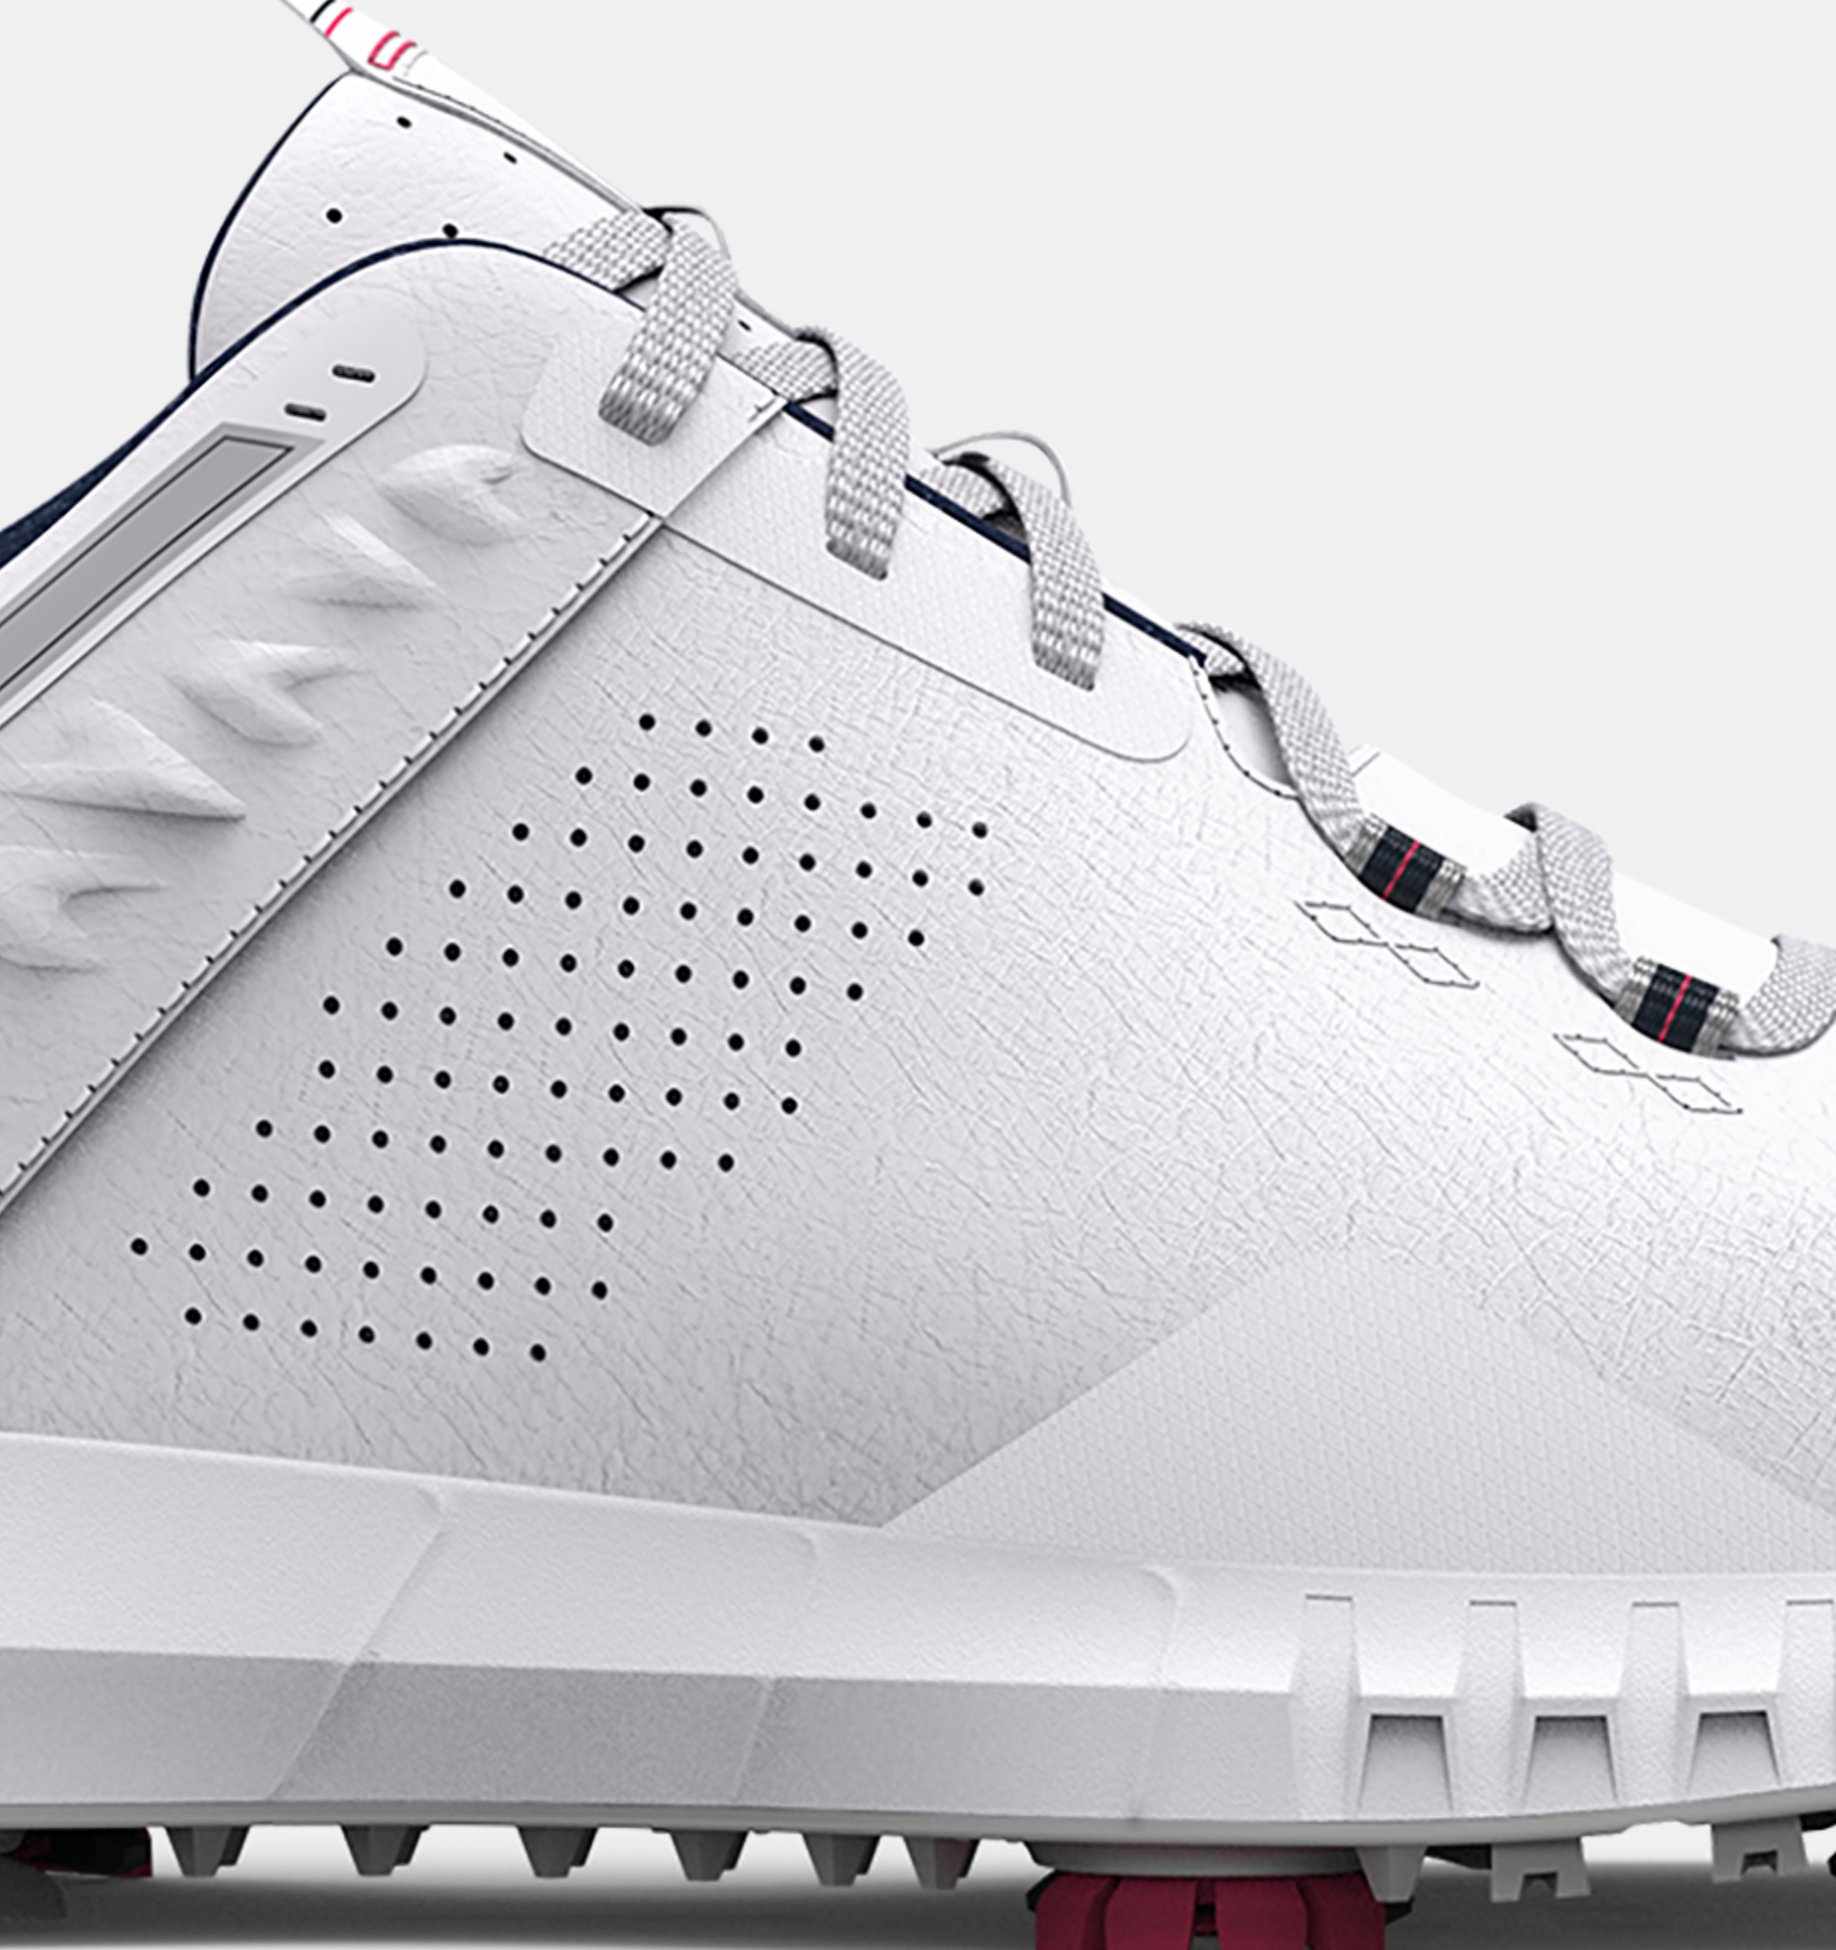 Are Under Armour Golf Shoes Good?